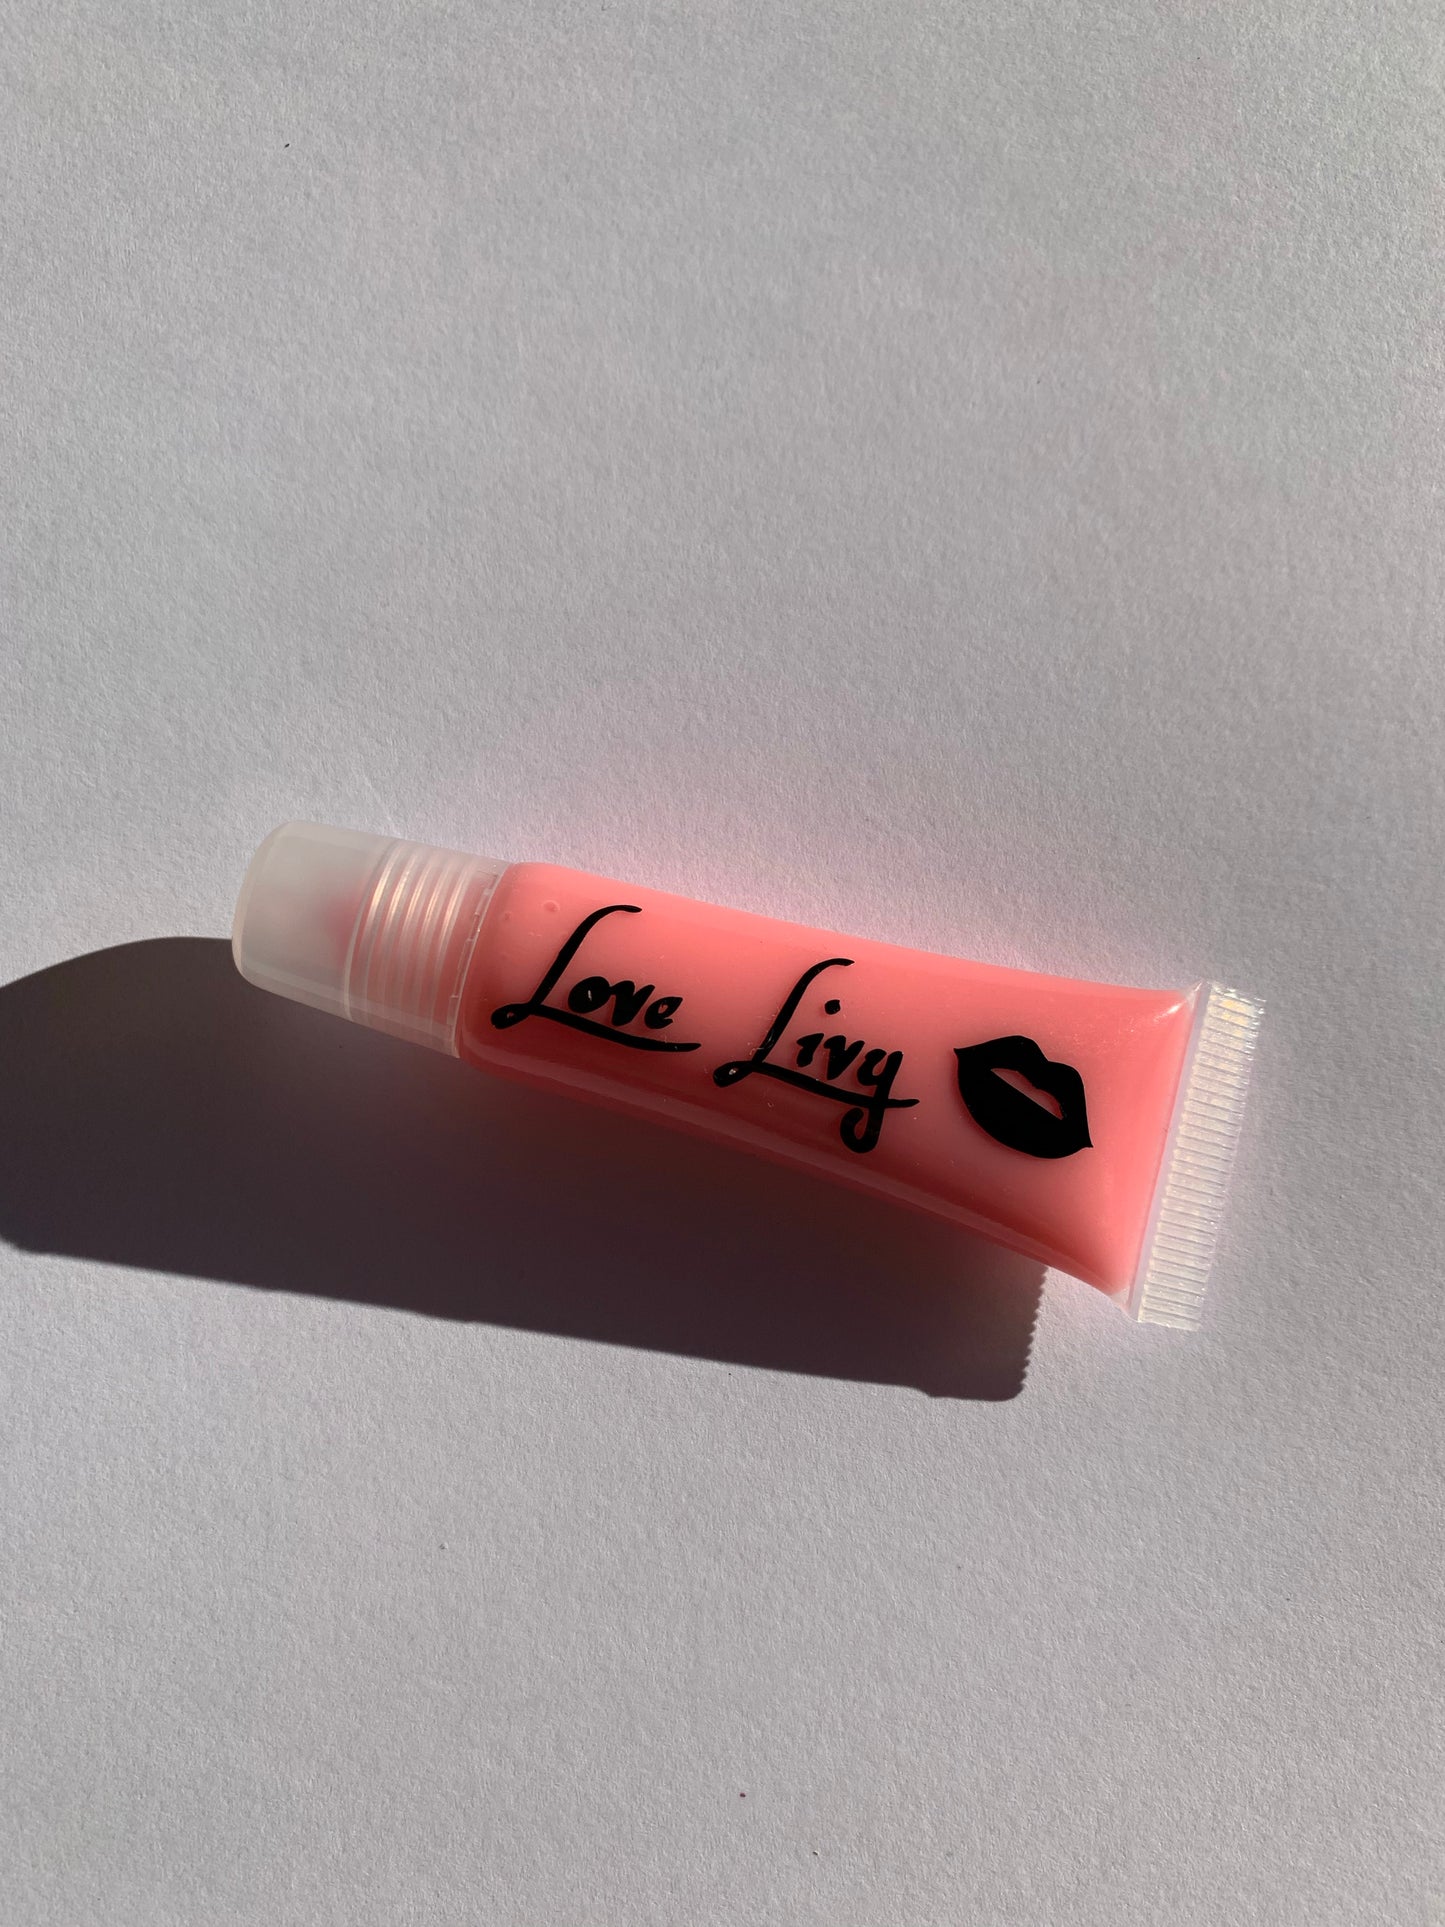 Strawberry Squeeze Tube Lipgloss